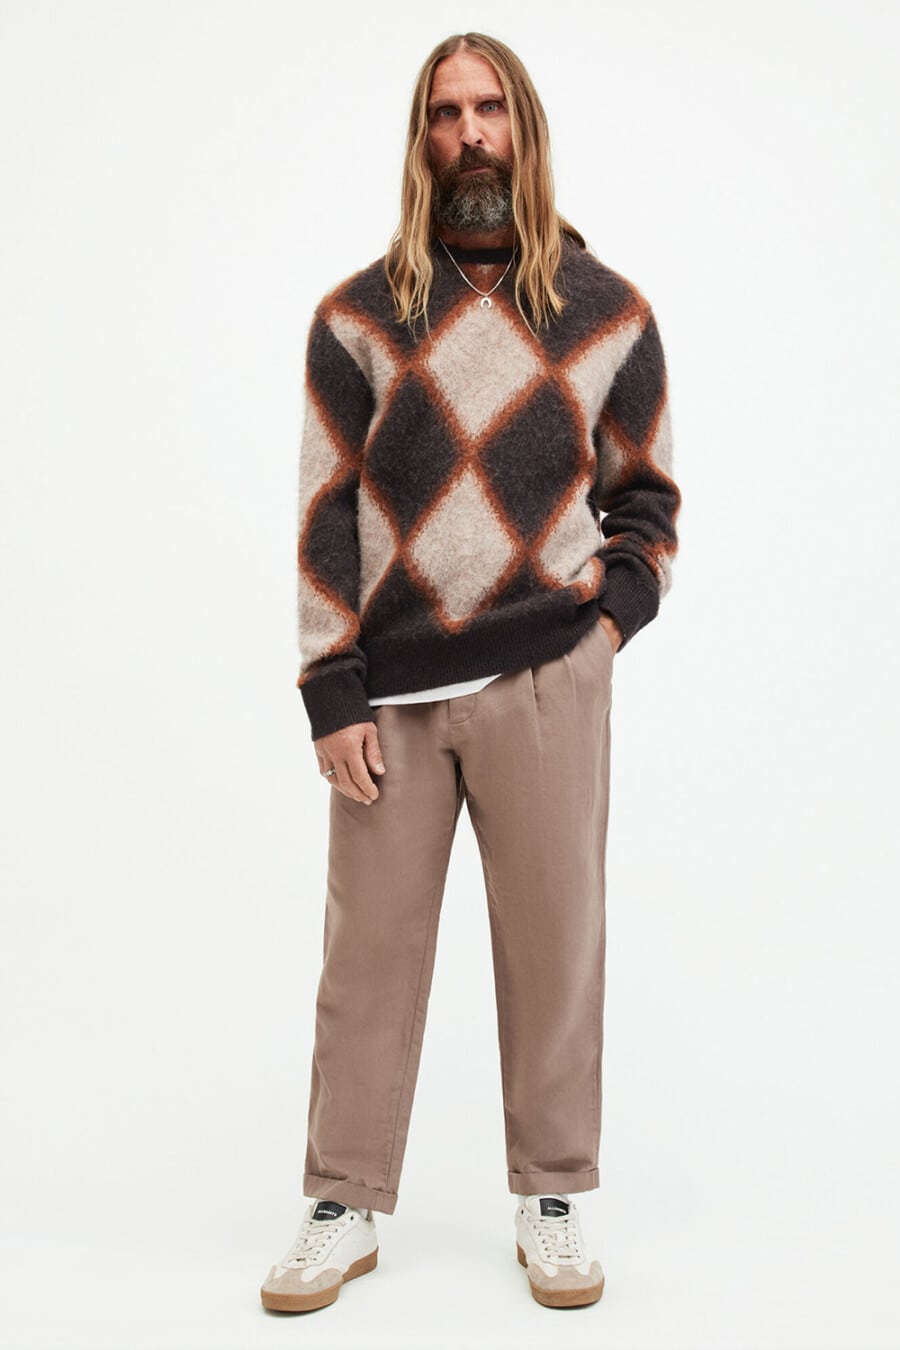 Men's wide khaki brown pants, White T-shirt, patterned brown/orange sweater and white retro sneakers grunge outfit